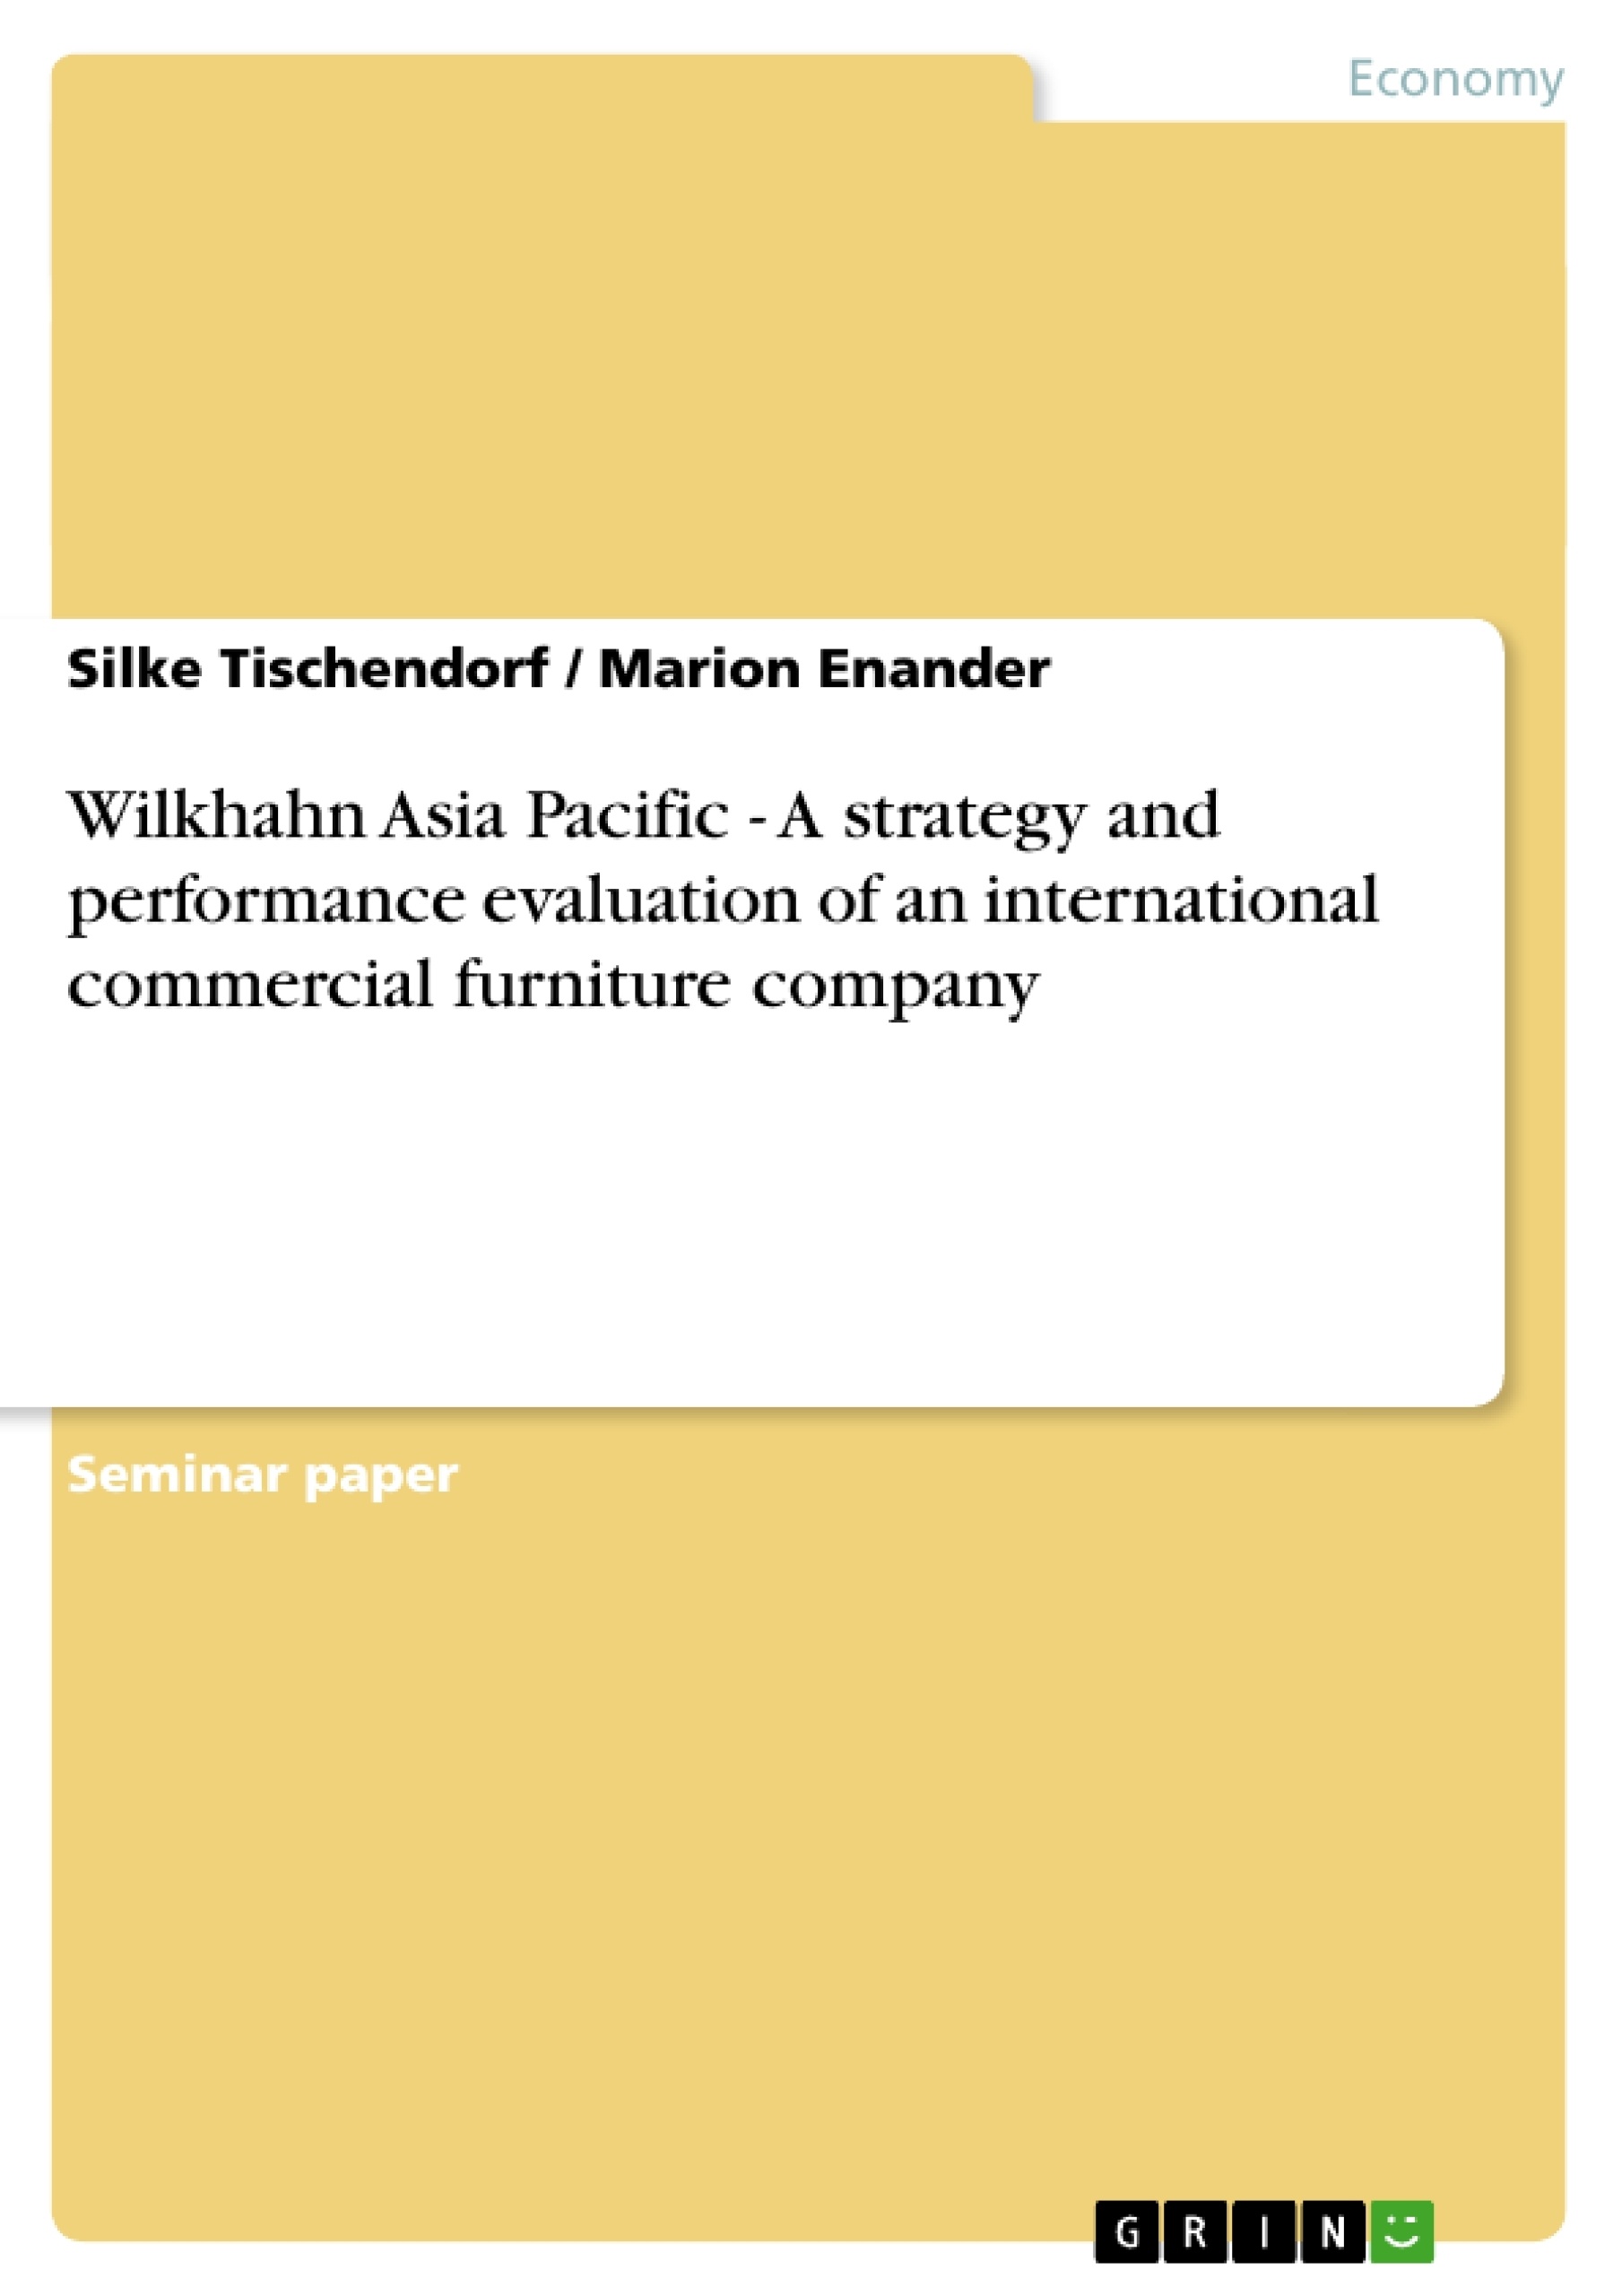 Title: Wilkhahn Asia Pacific - A strategy and performance evaluation of an international commercial furniture company